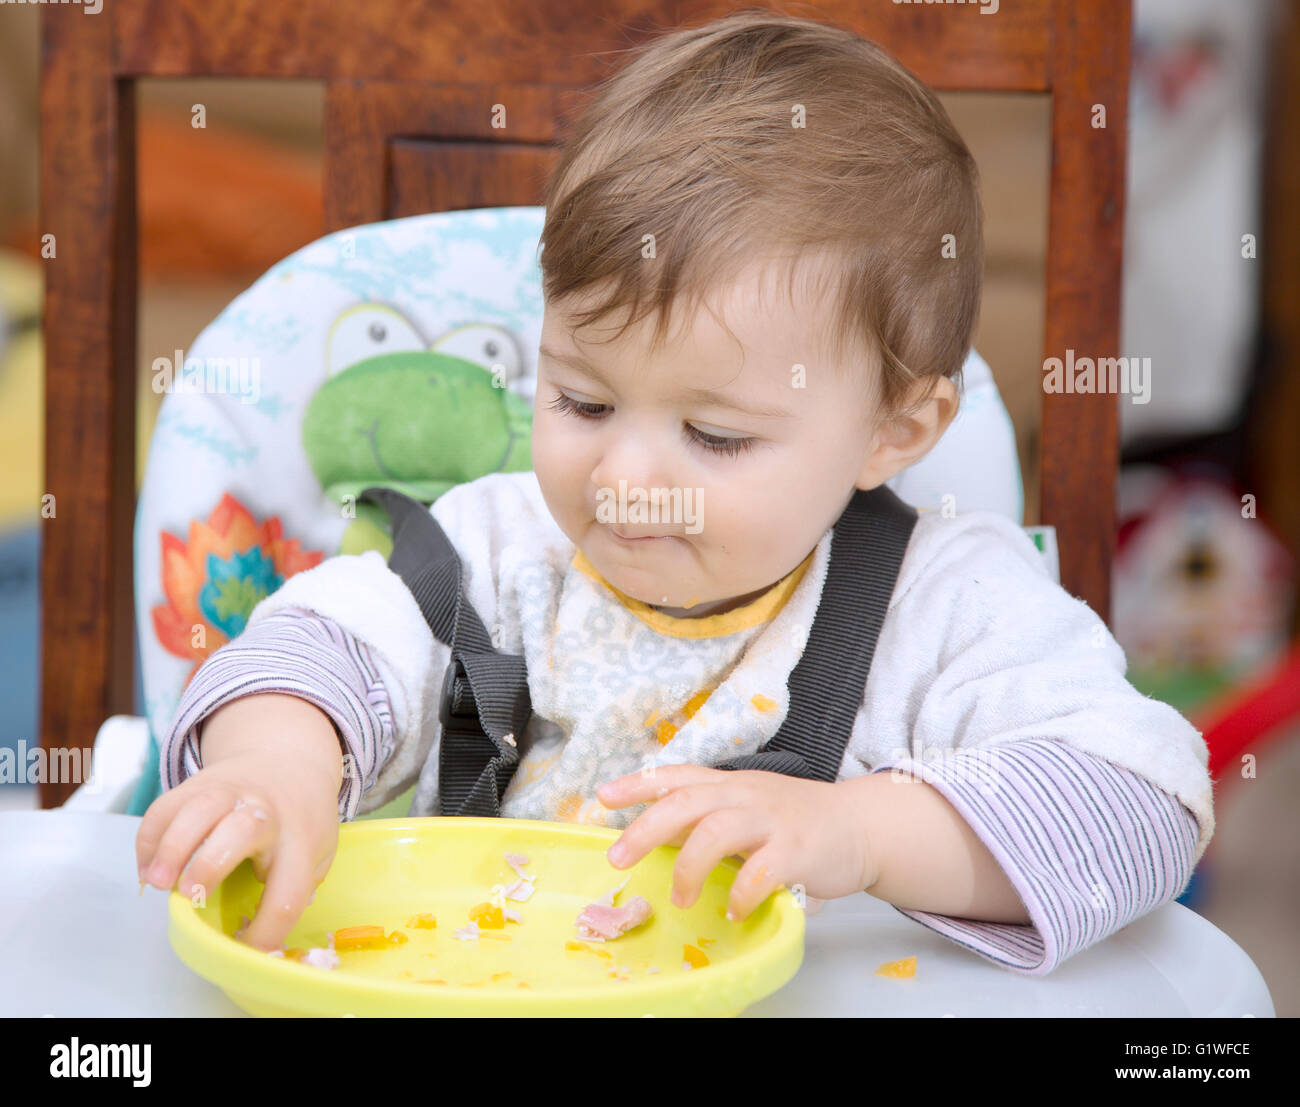 Portrait of lovely one year old baby eating with hands Stock Photo